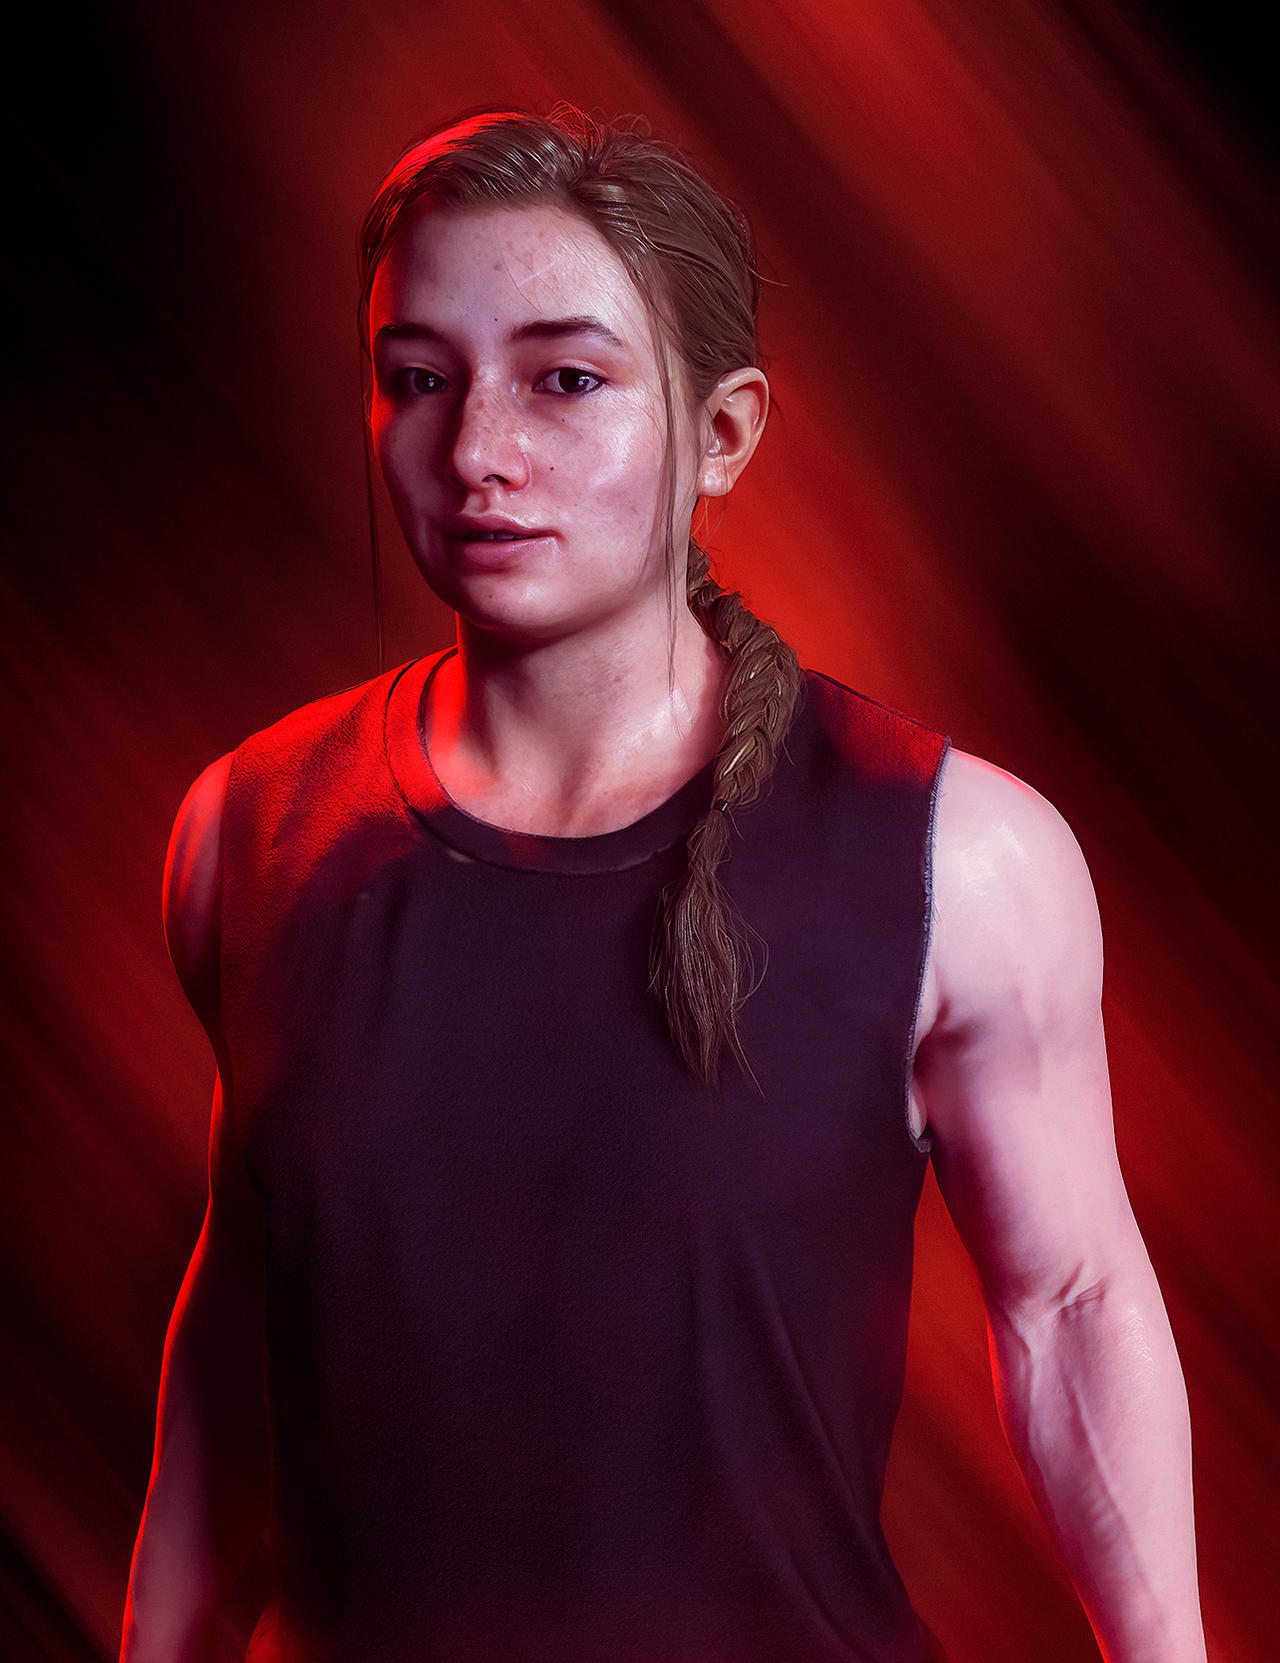 Abby - The Last Of Us Part 2 by Reikayr on DeviantArt